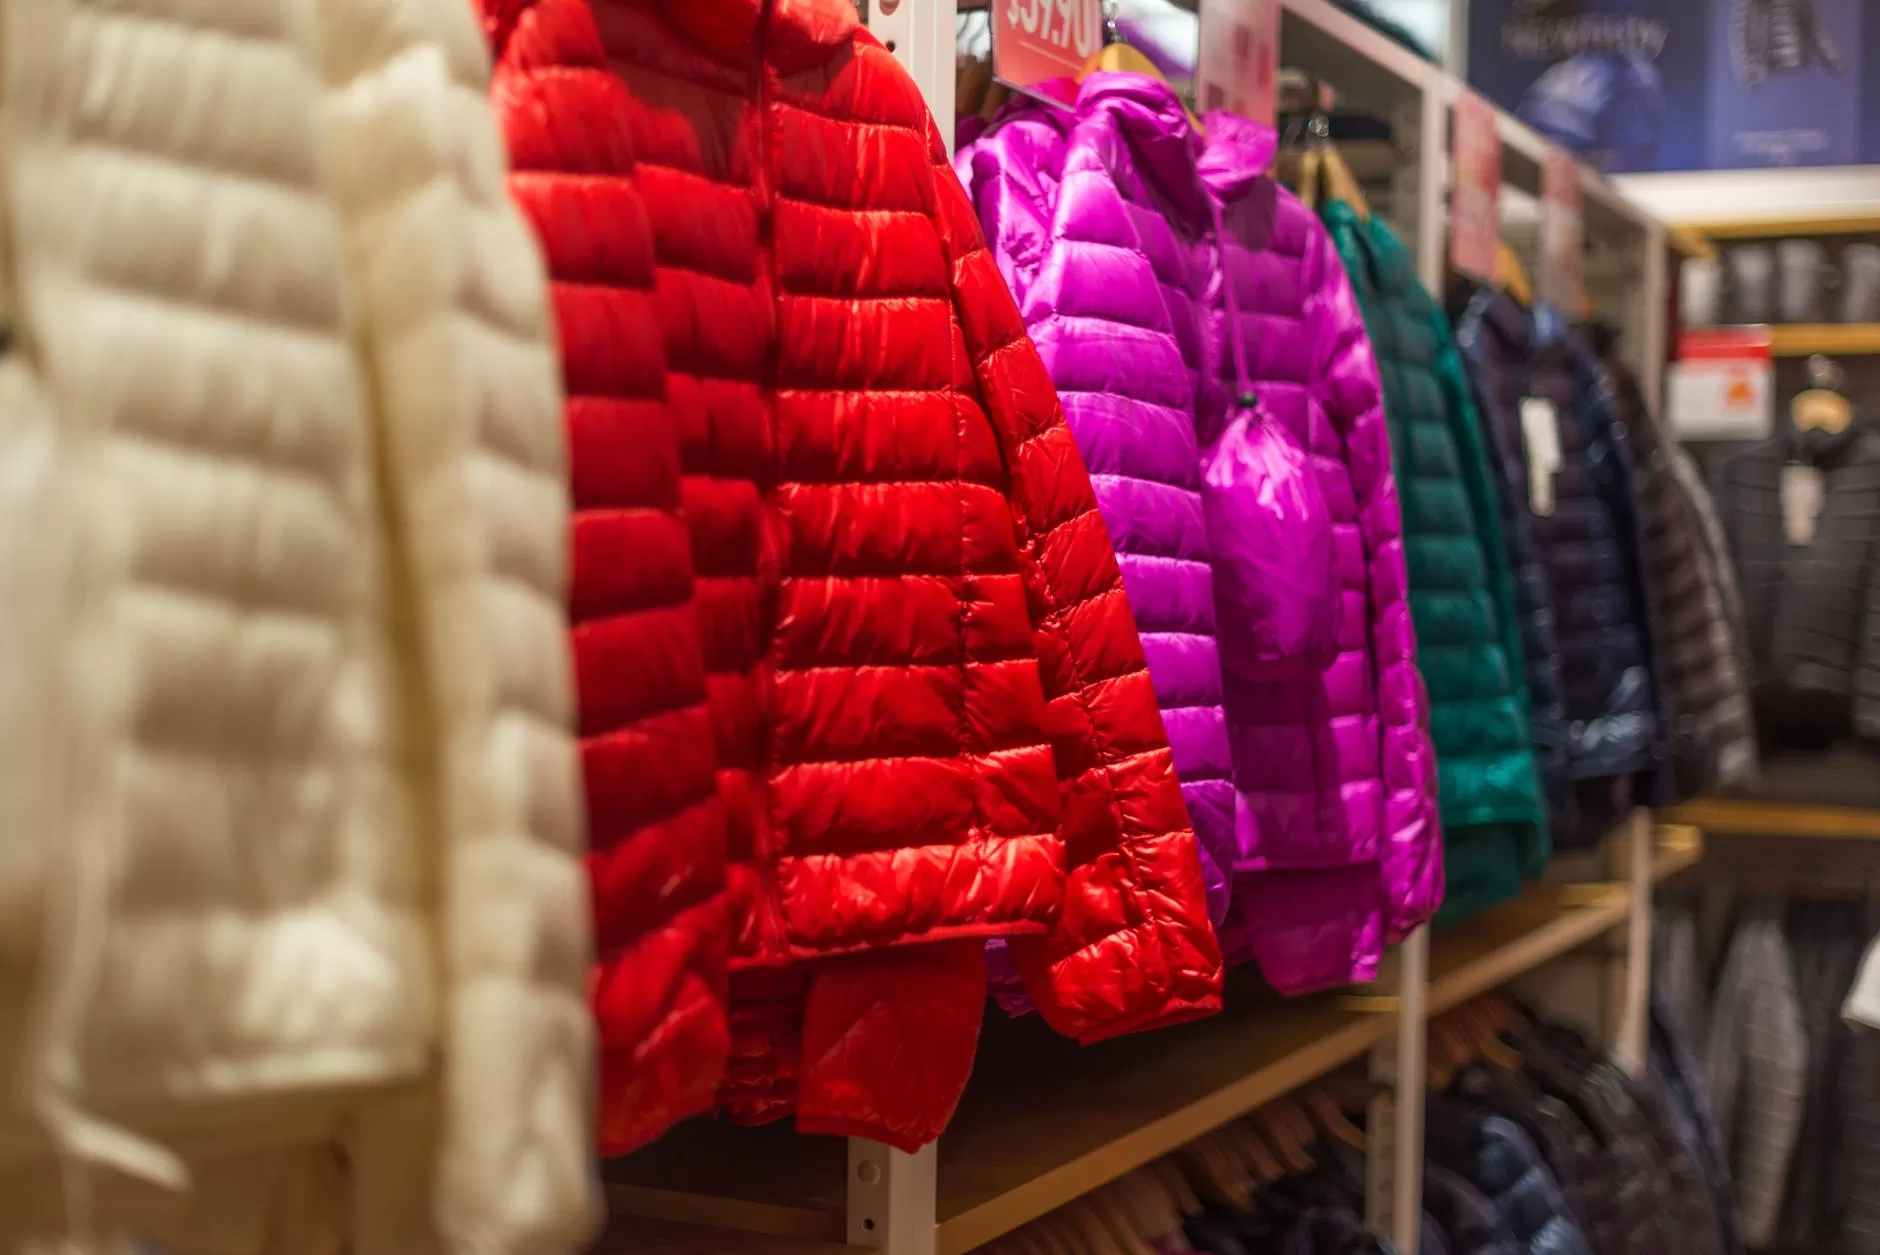 assorted color bubble jackets hanged